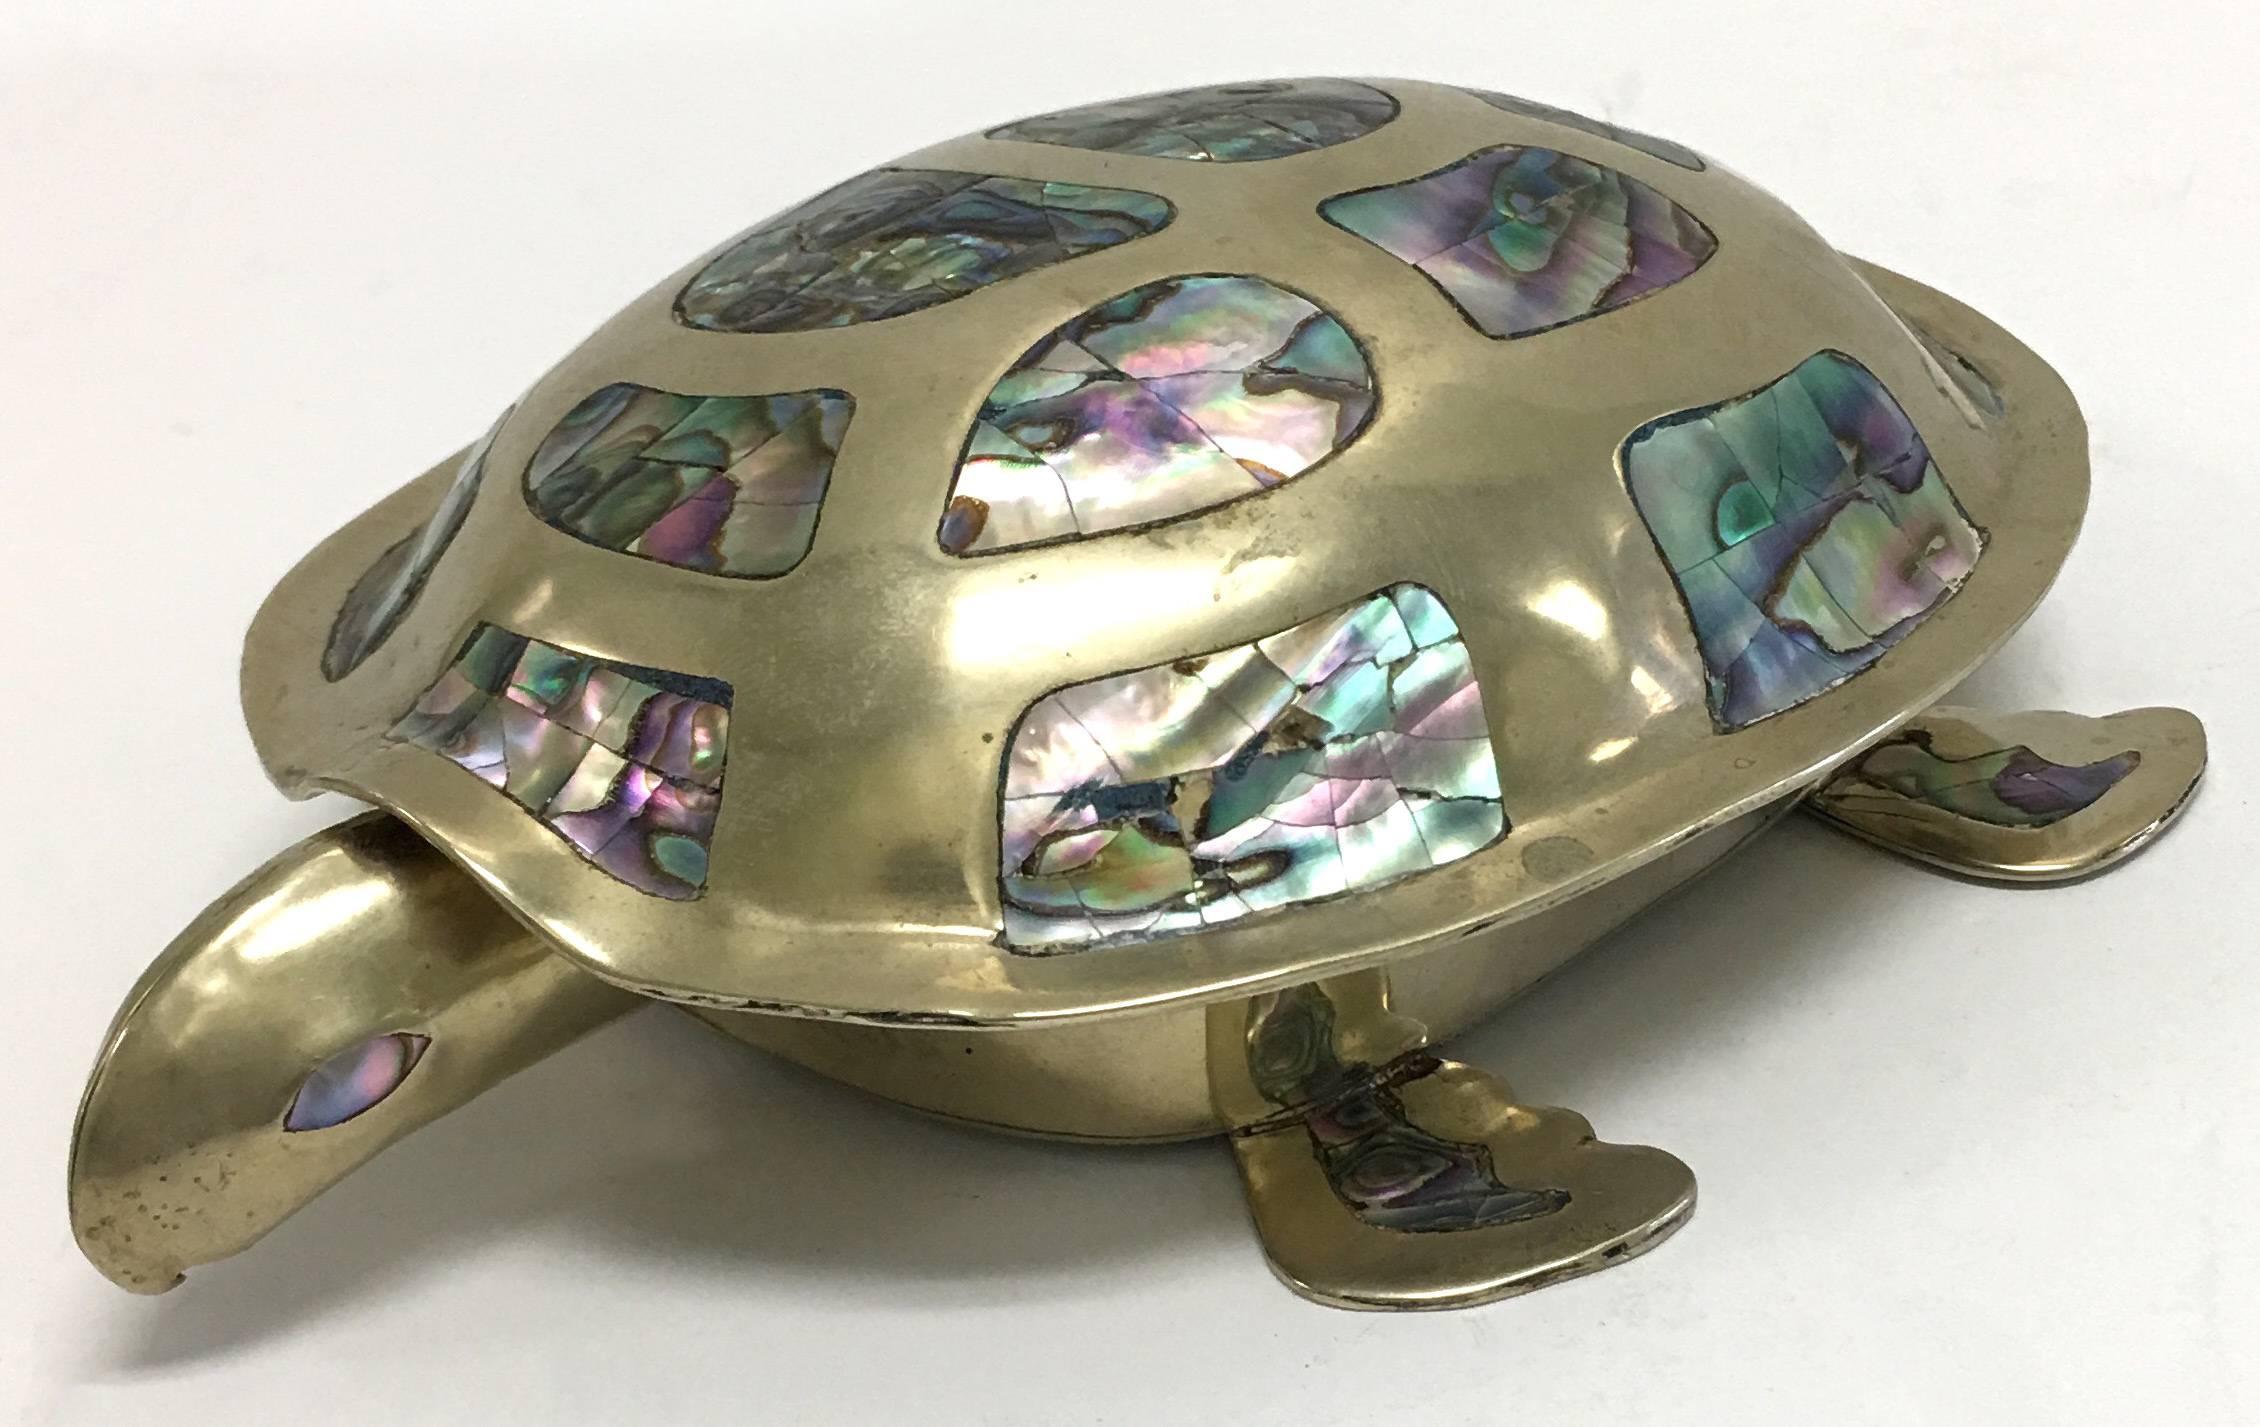 Mexican turtle box made from alpaca silver (nickeled silver) and abalone. Signed 'Mexico' on the underside.